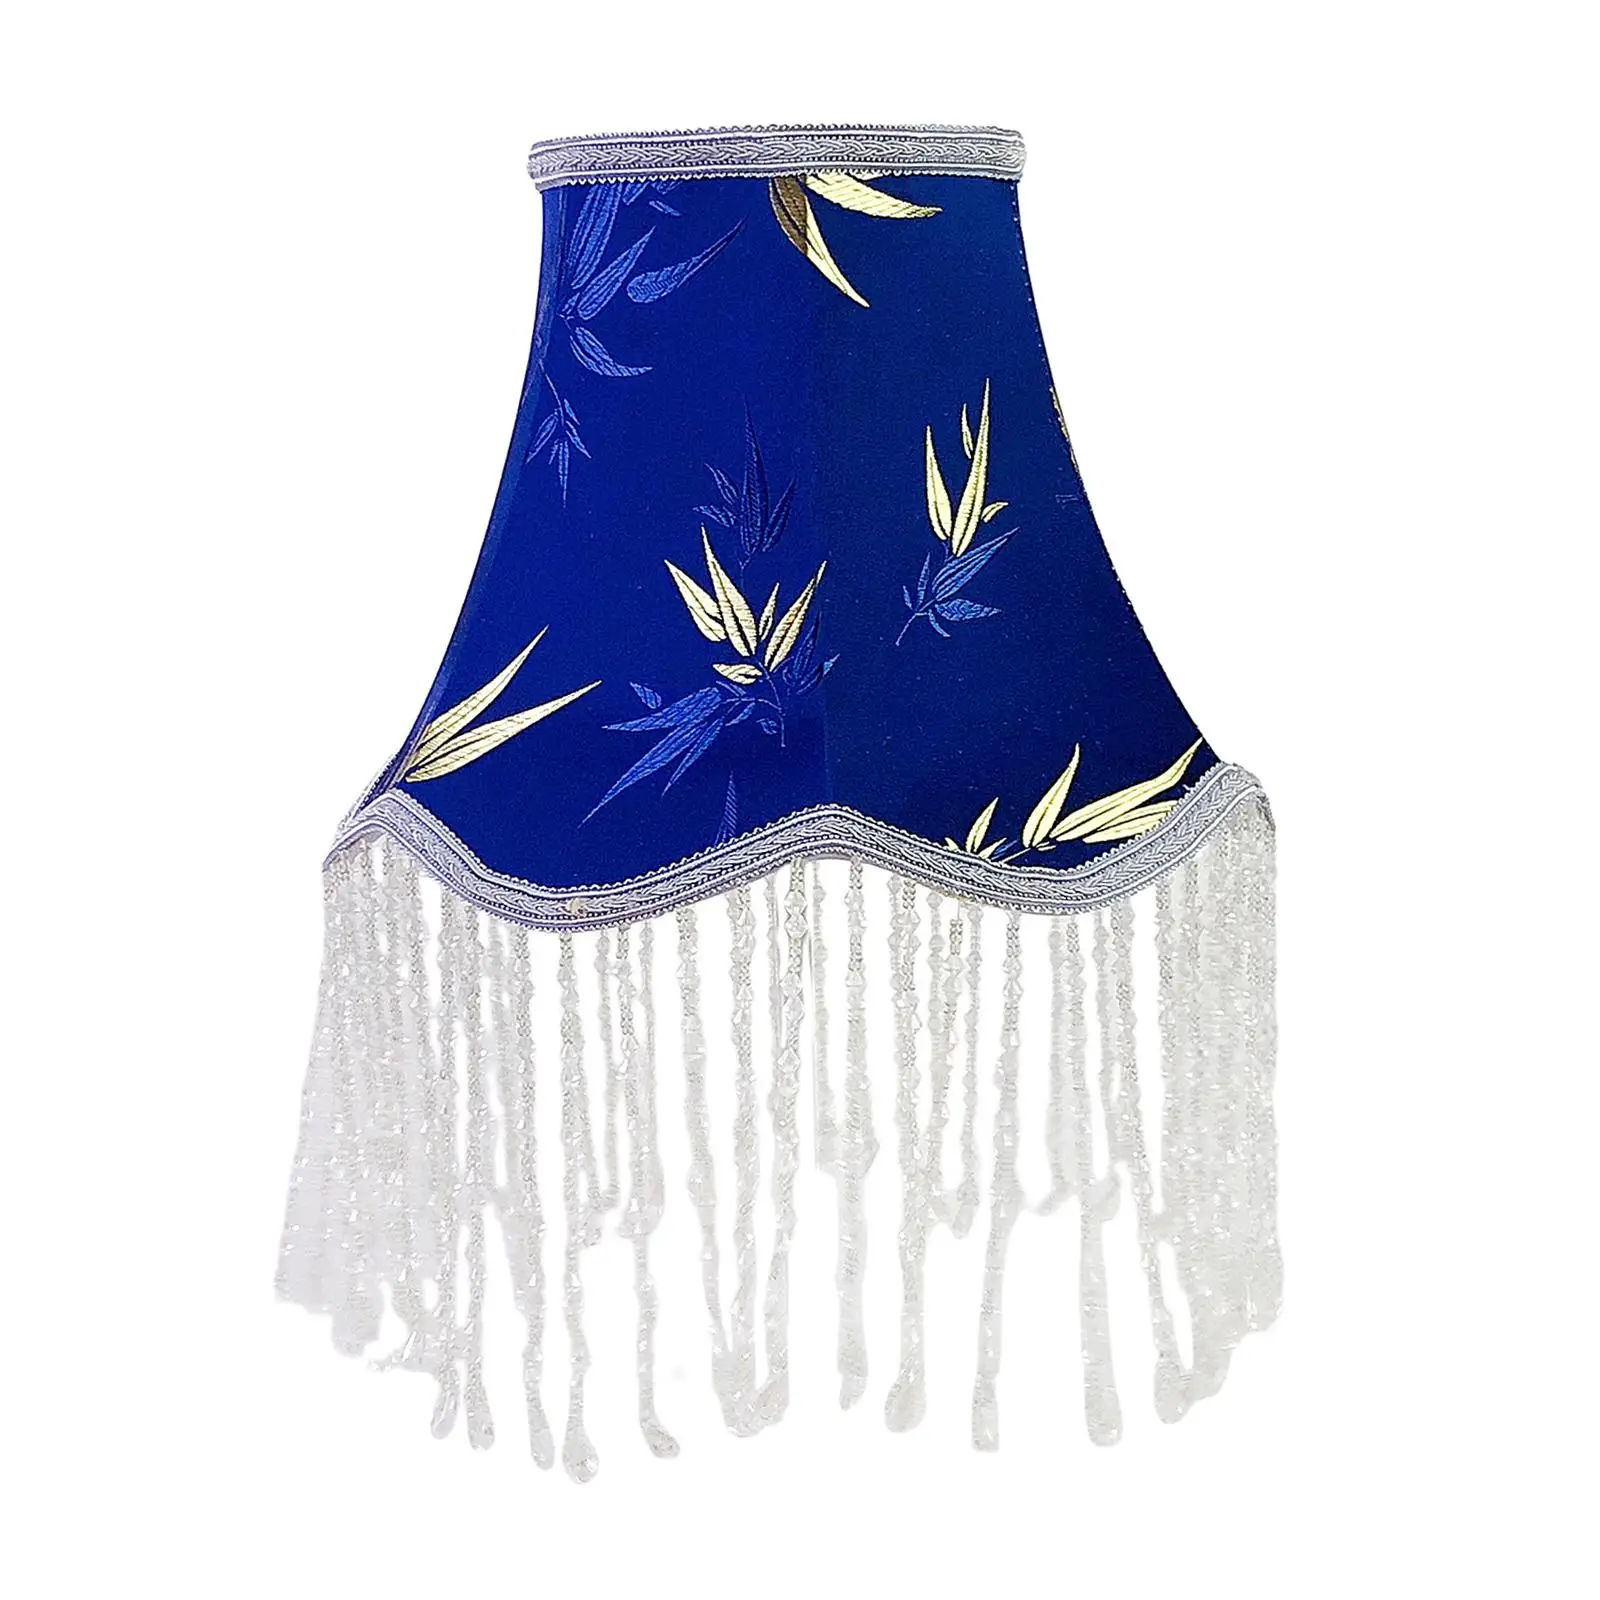 Fringe Beads Lamp Shade for Table Floor Pendant Lamp European Lampshade for Dining Room Home Office Hotel Living Room Bedroom